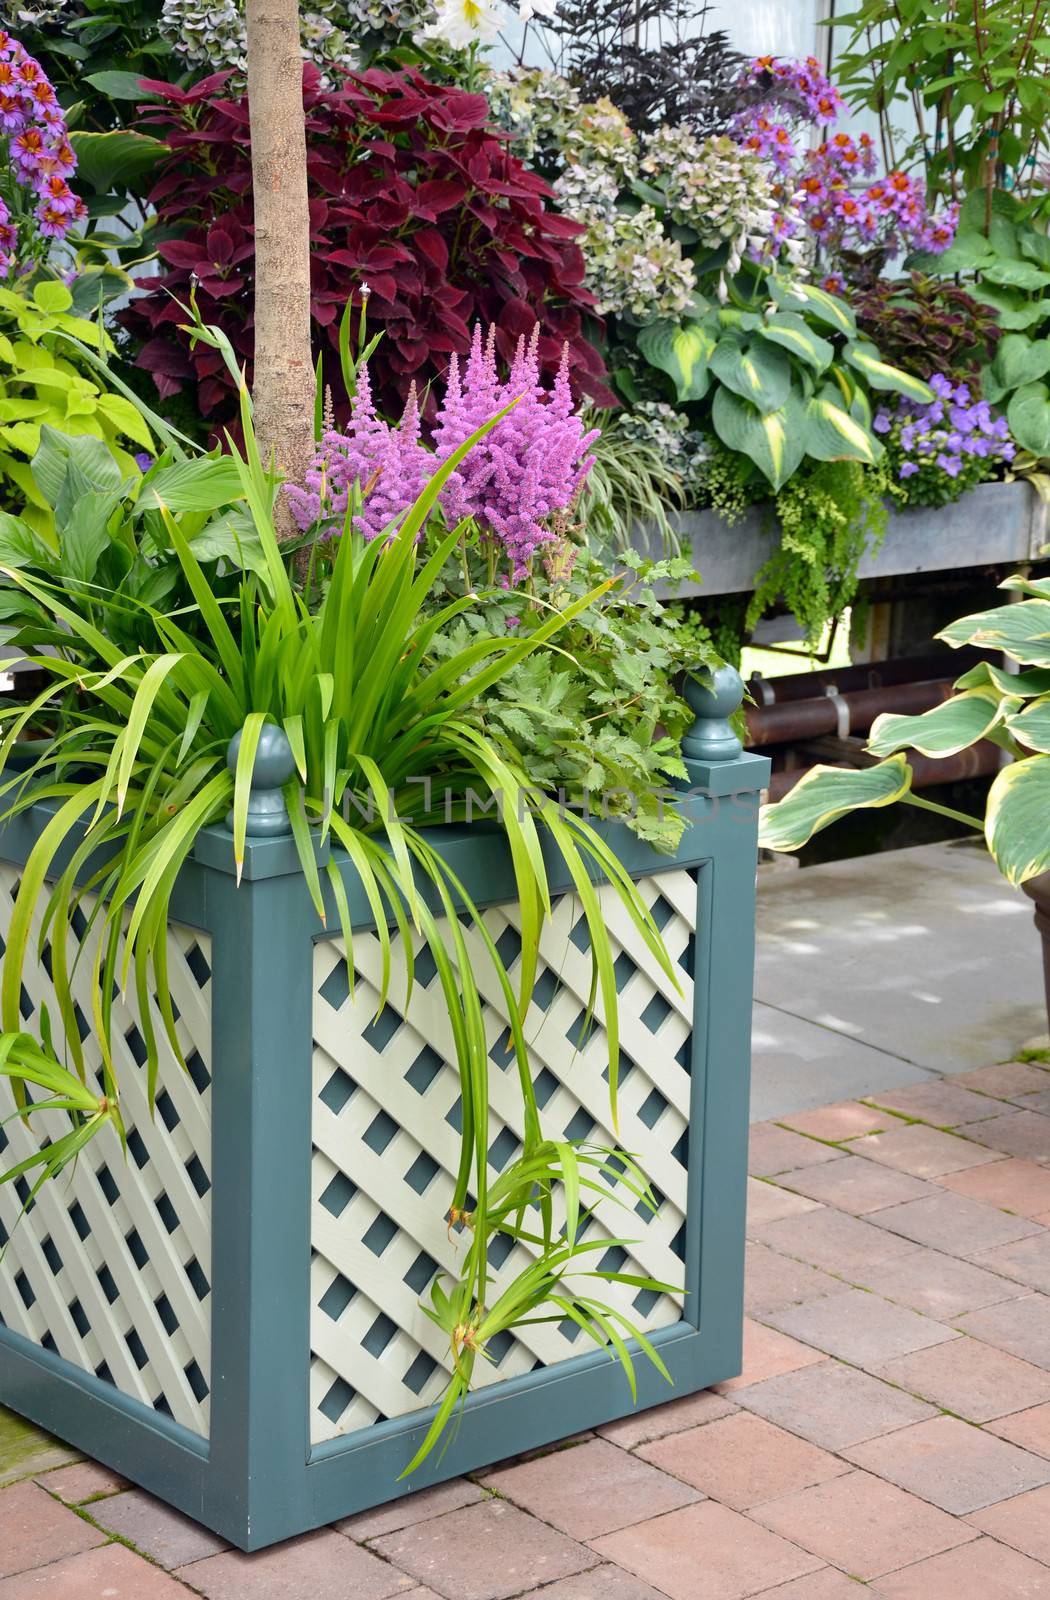 Patio with colorful tropical plants and flowers